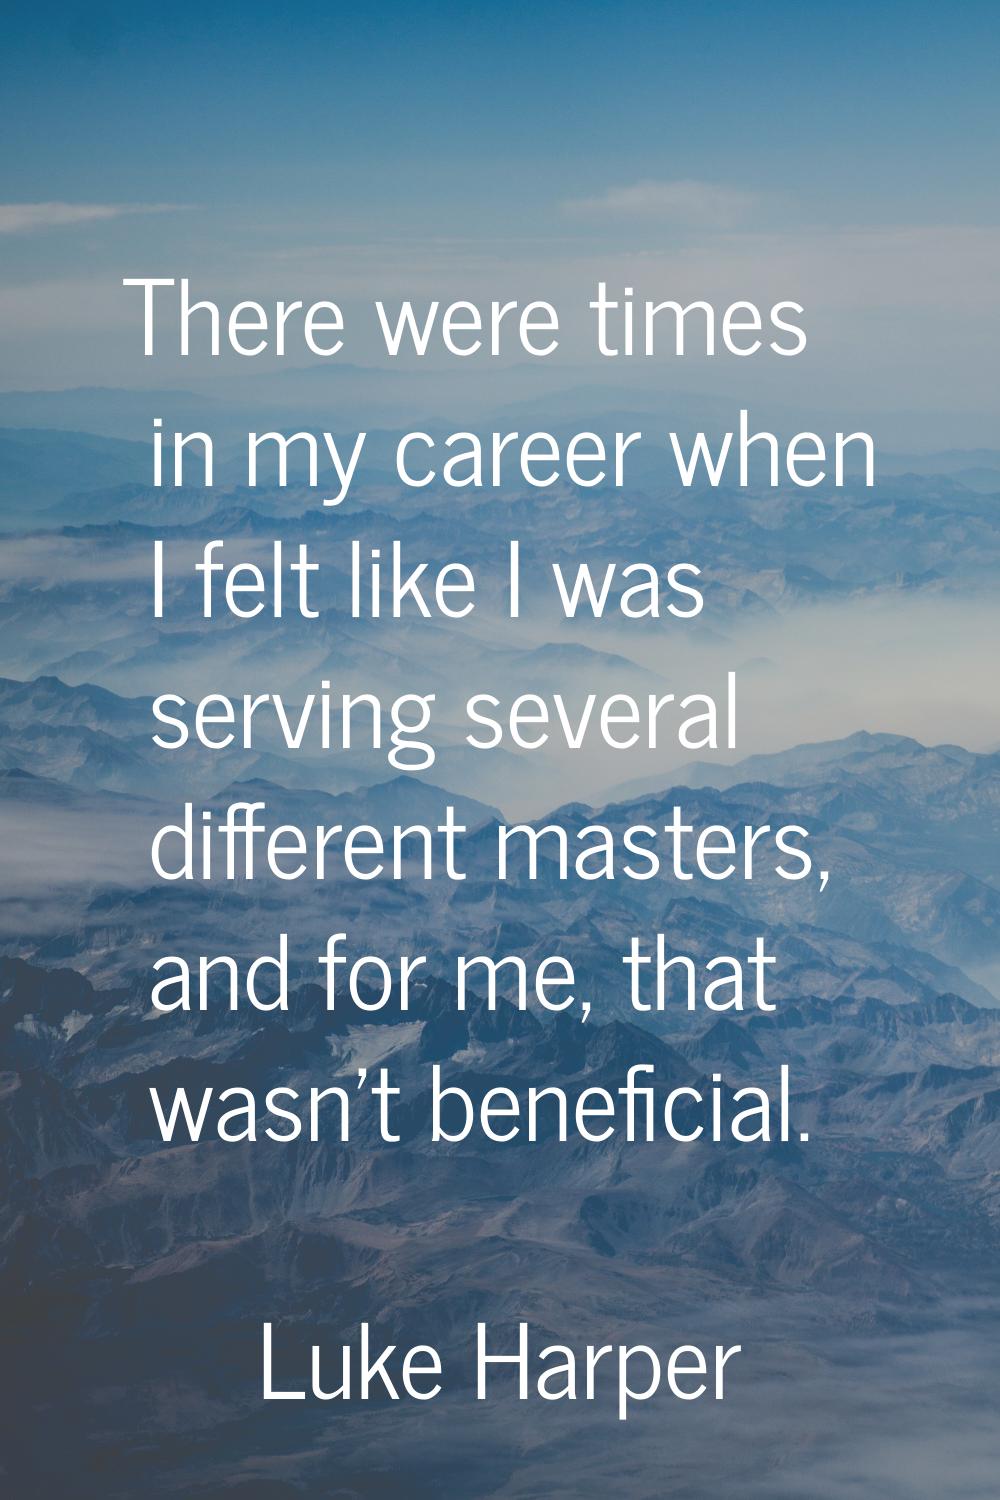 There were times in my career when I felt like I was serving several different masters, and for me,